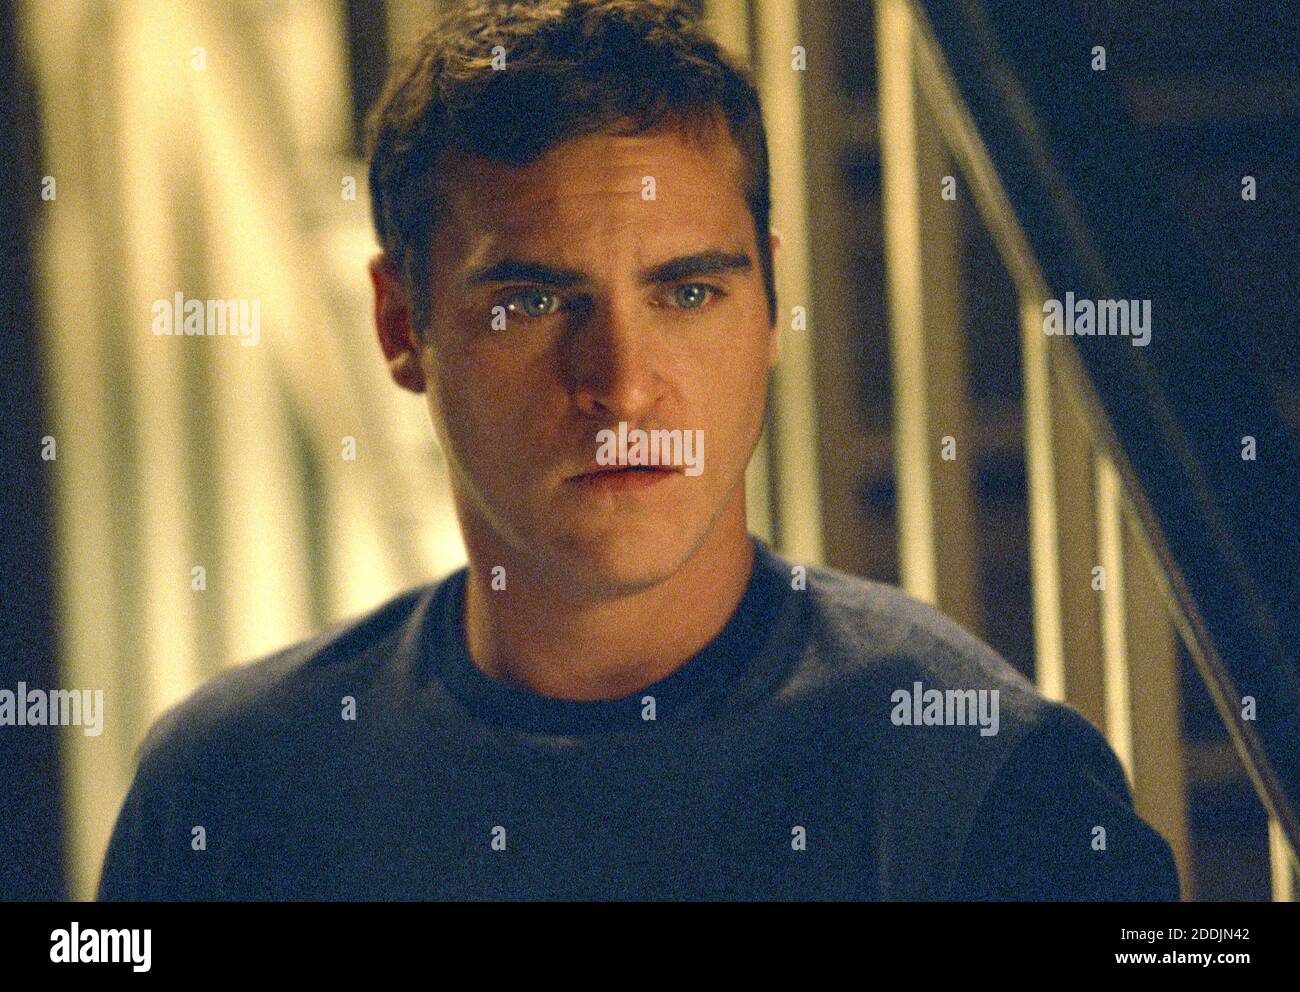 Joaquin Phoenix, 'Signs' (2002)  Photo credit: Touchstone / The Hollywood Archive / File Reference # 34078-0349FSTHA Stock Photo